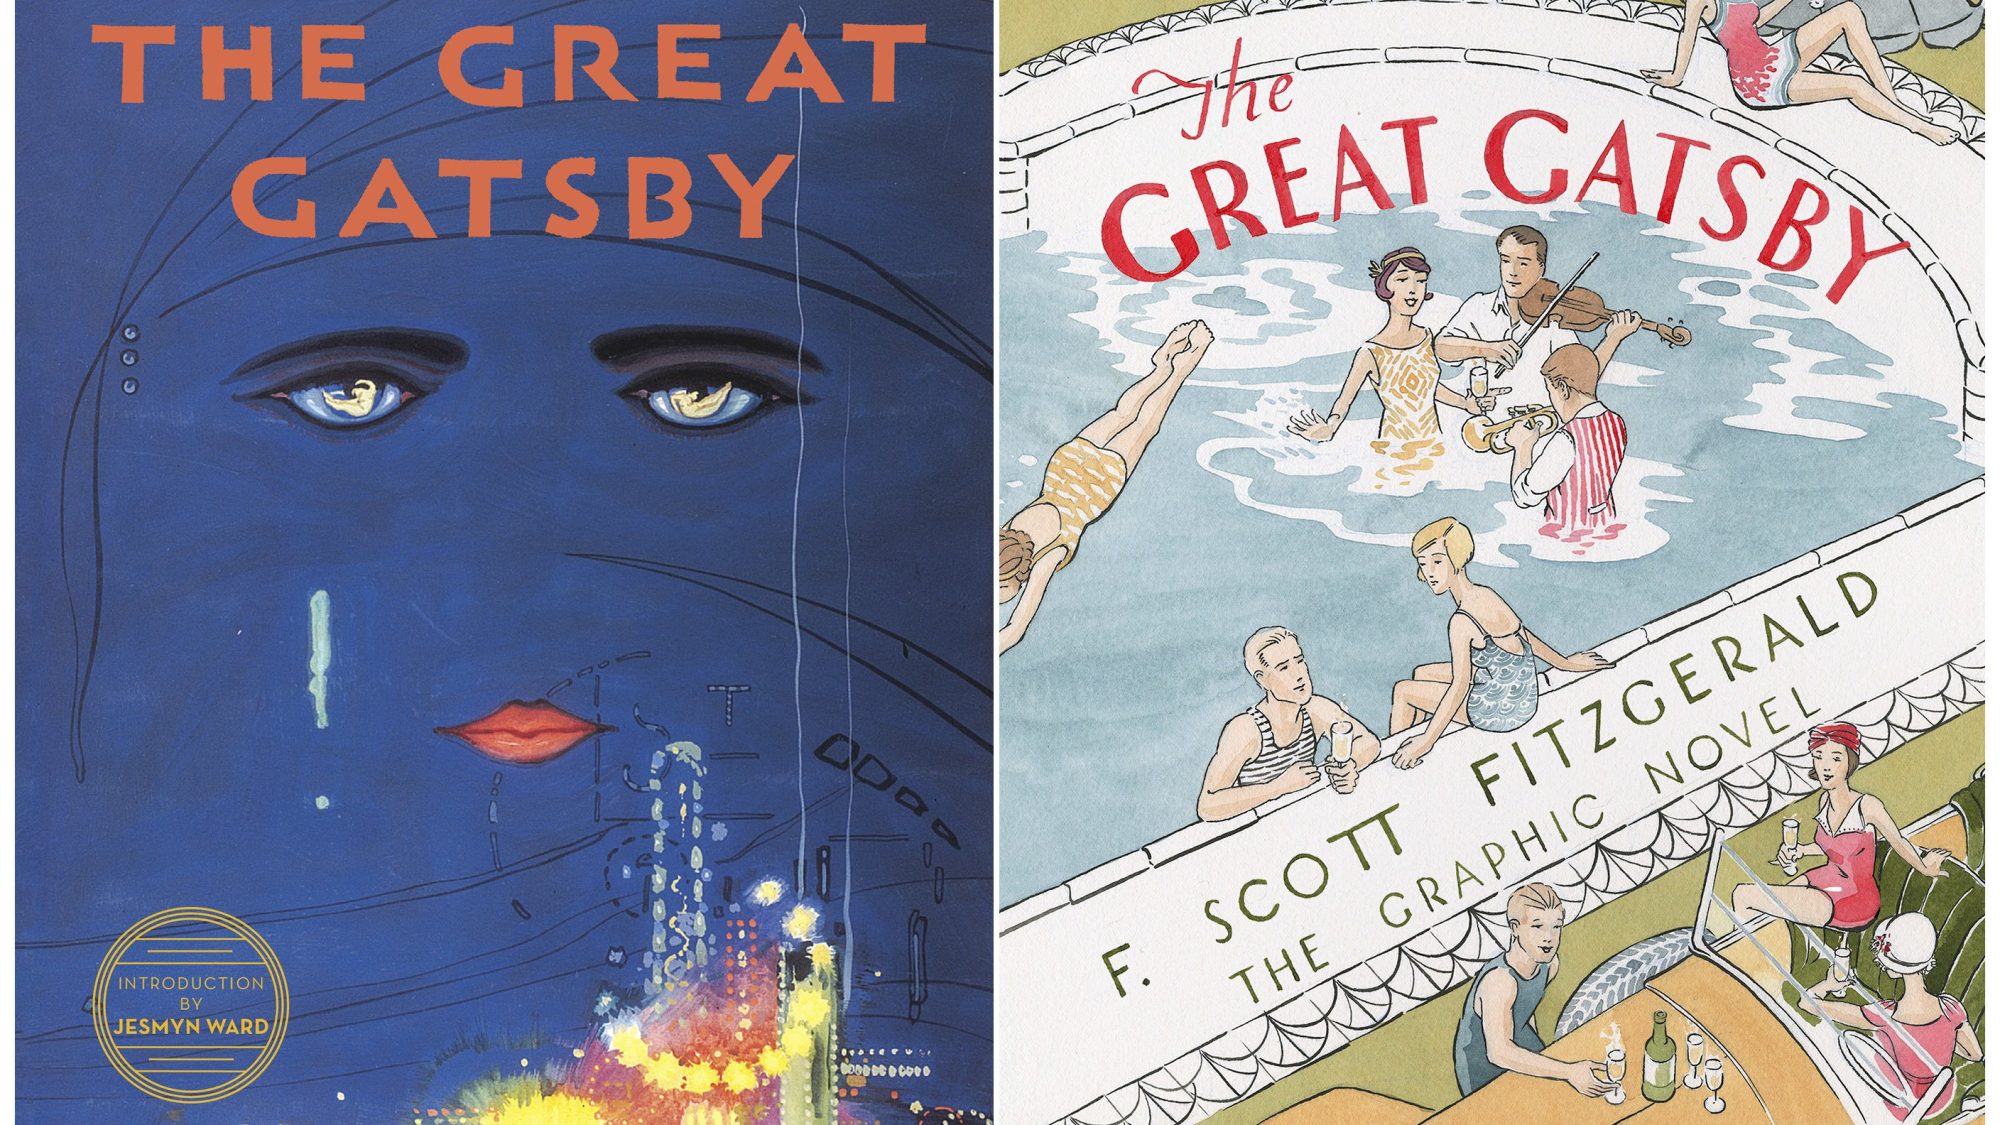 Cover image of the novel &quot;The Great Gatsby&quot; by F. Scott Fitzgerald (LEFT) and &quot;The Great Gatsby: The Graphic Novel&quot; (RIGHT)